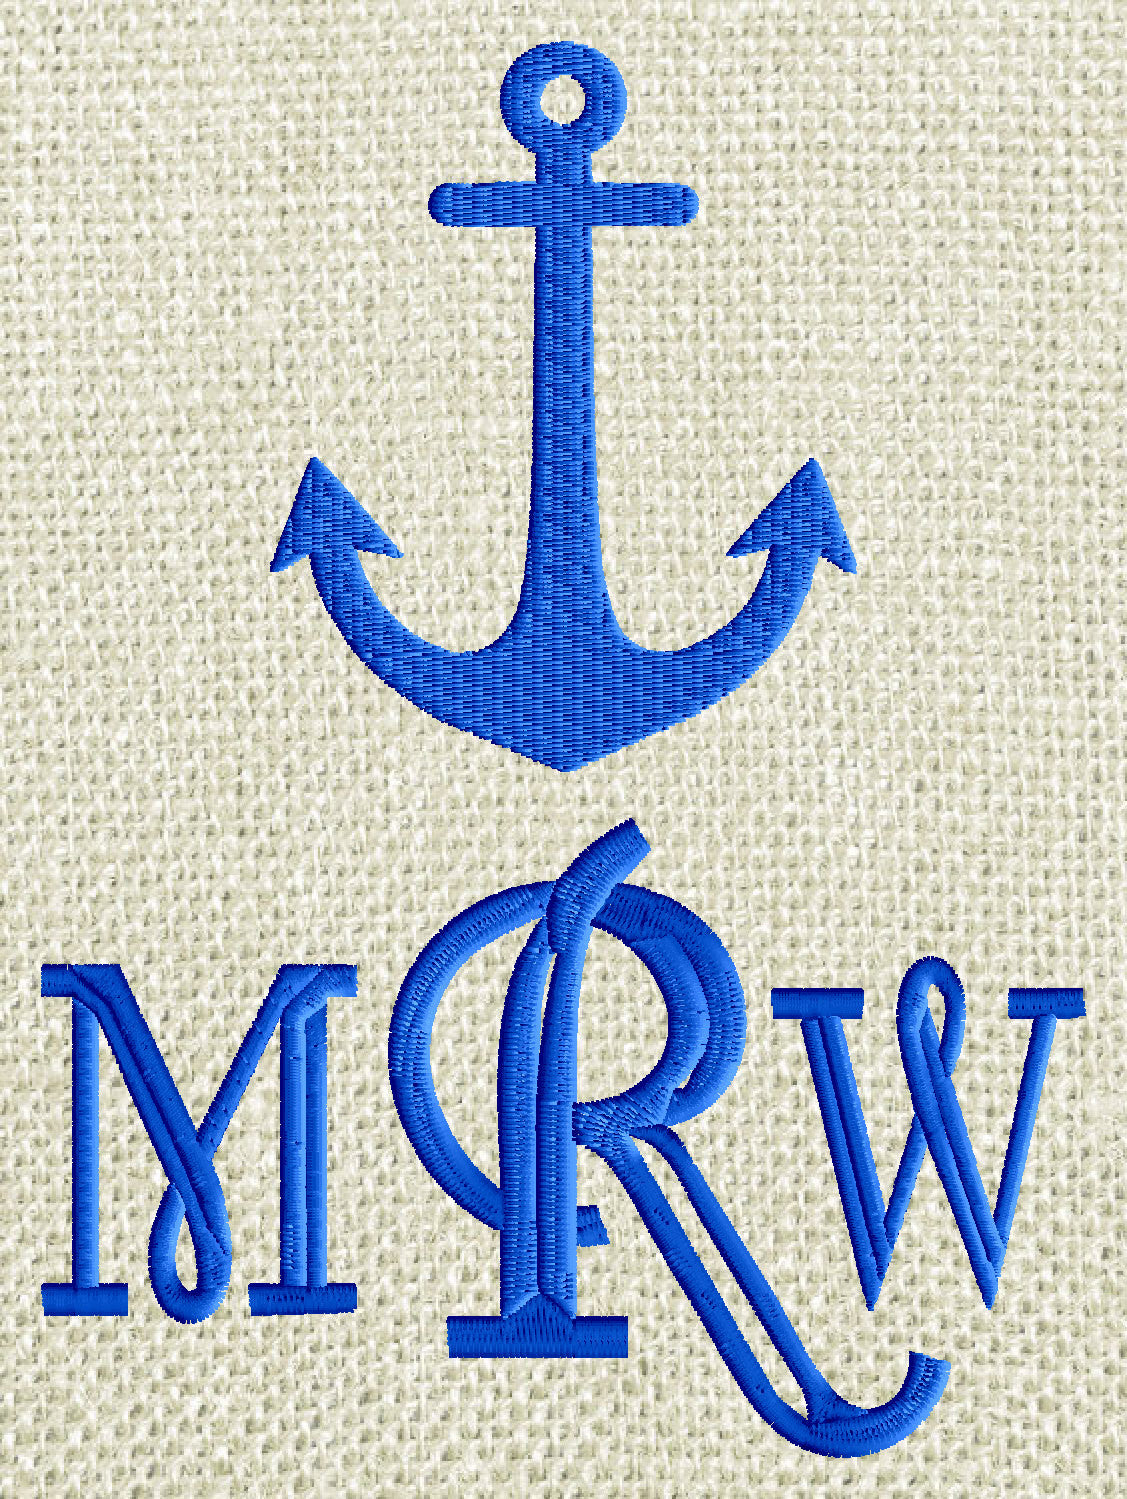 Nautical Anchor Embroidery Design - Font not included - EMBROIDERY DESIGN FILE - Instant download - 2 sizes - Dst Hus Jef Pes Vp3 Exp Xxx formats